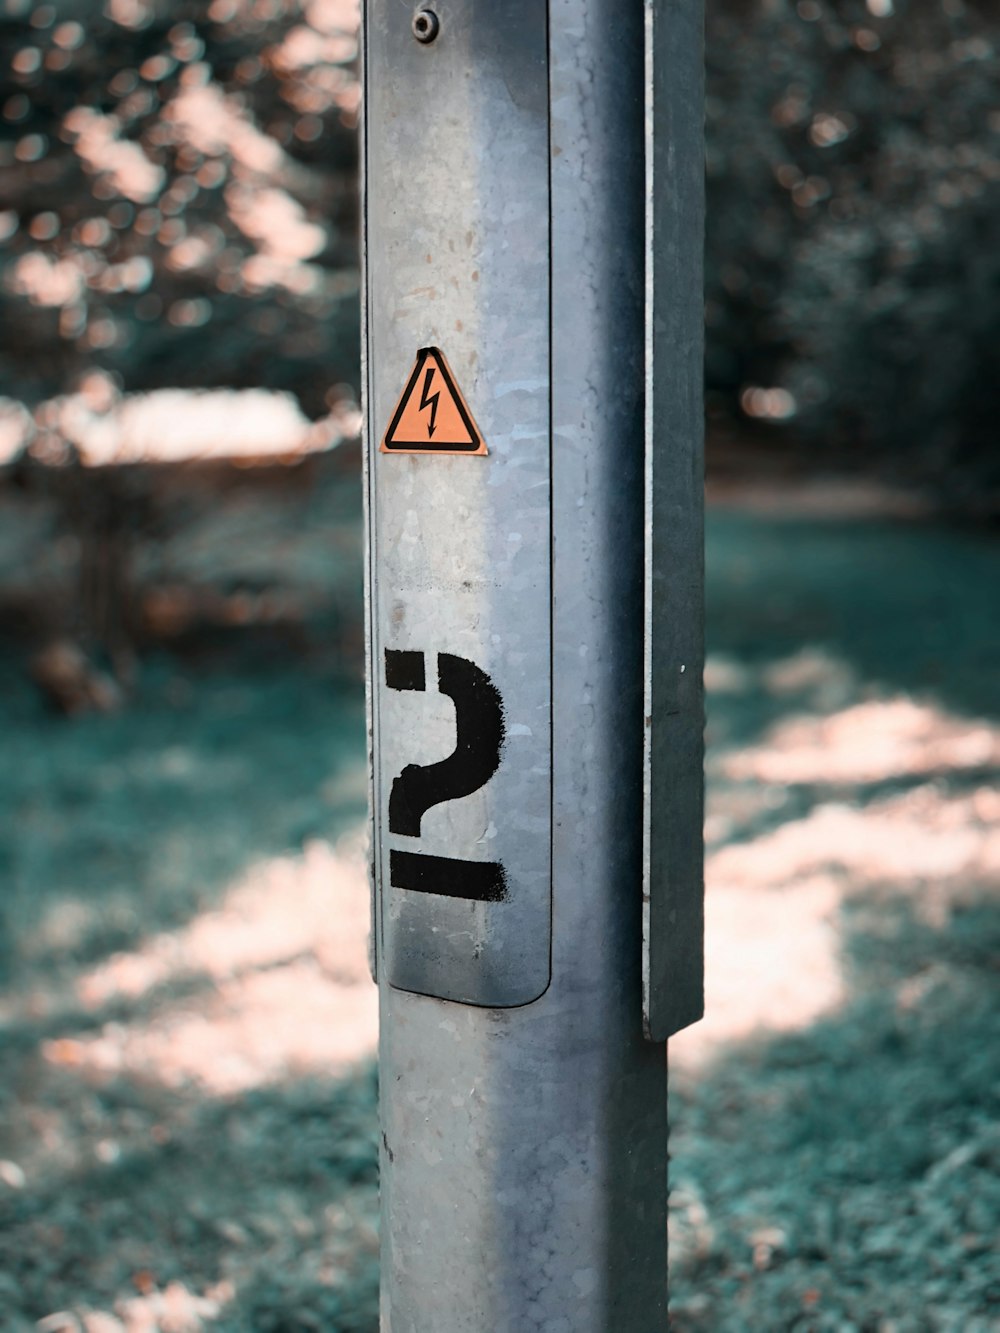 a metal pole with a street sign on it